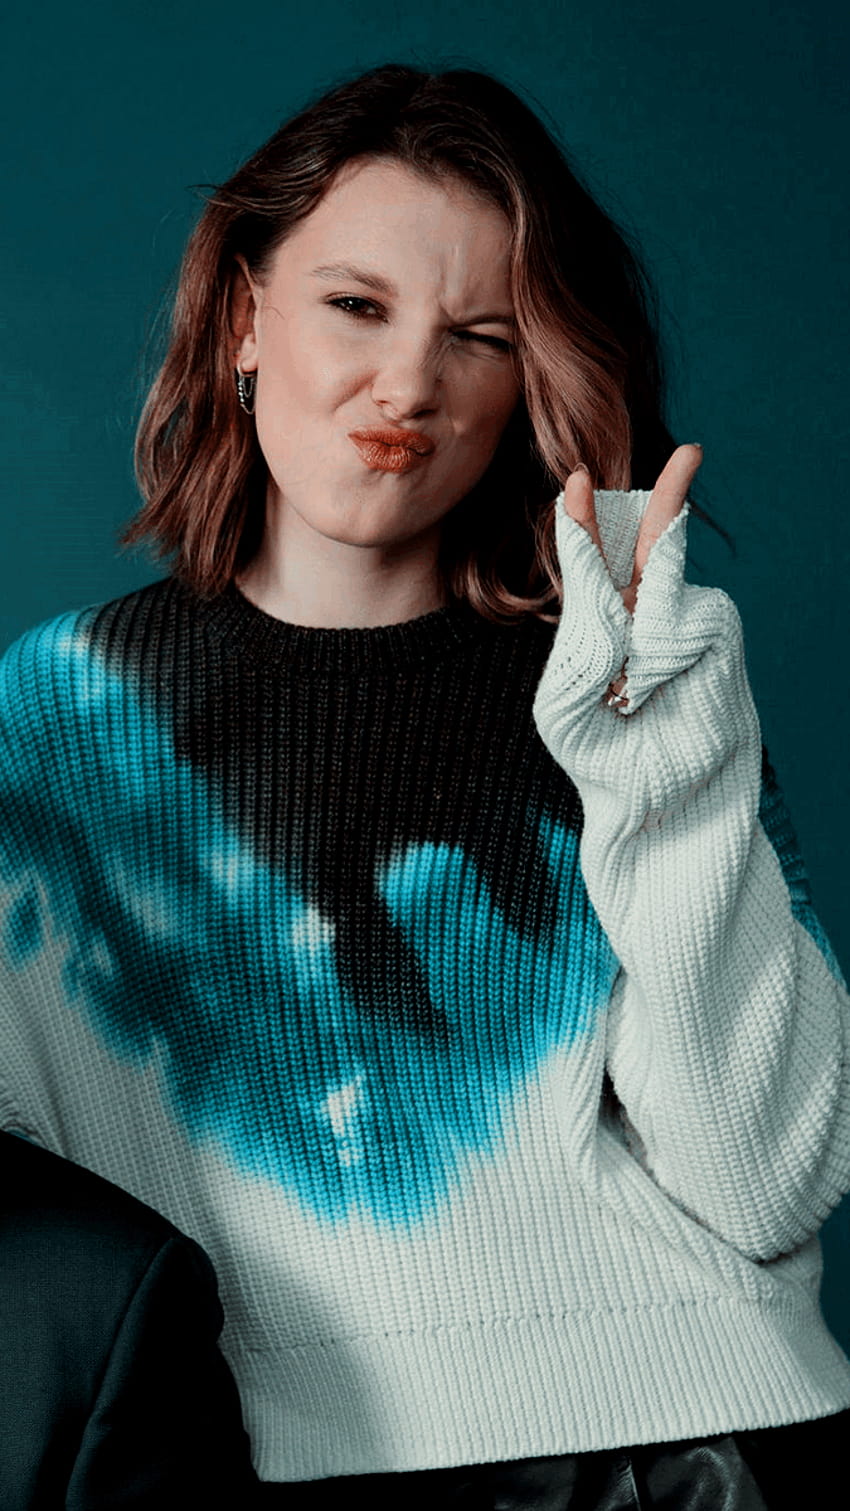 millie bobby brown Tumblr posts, millie bobby brown 2020 iphone HD phone wallpaper